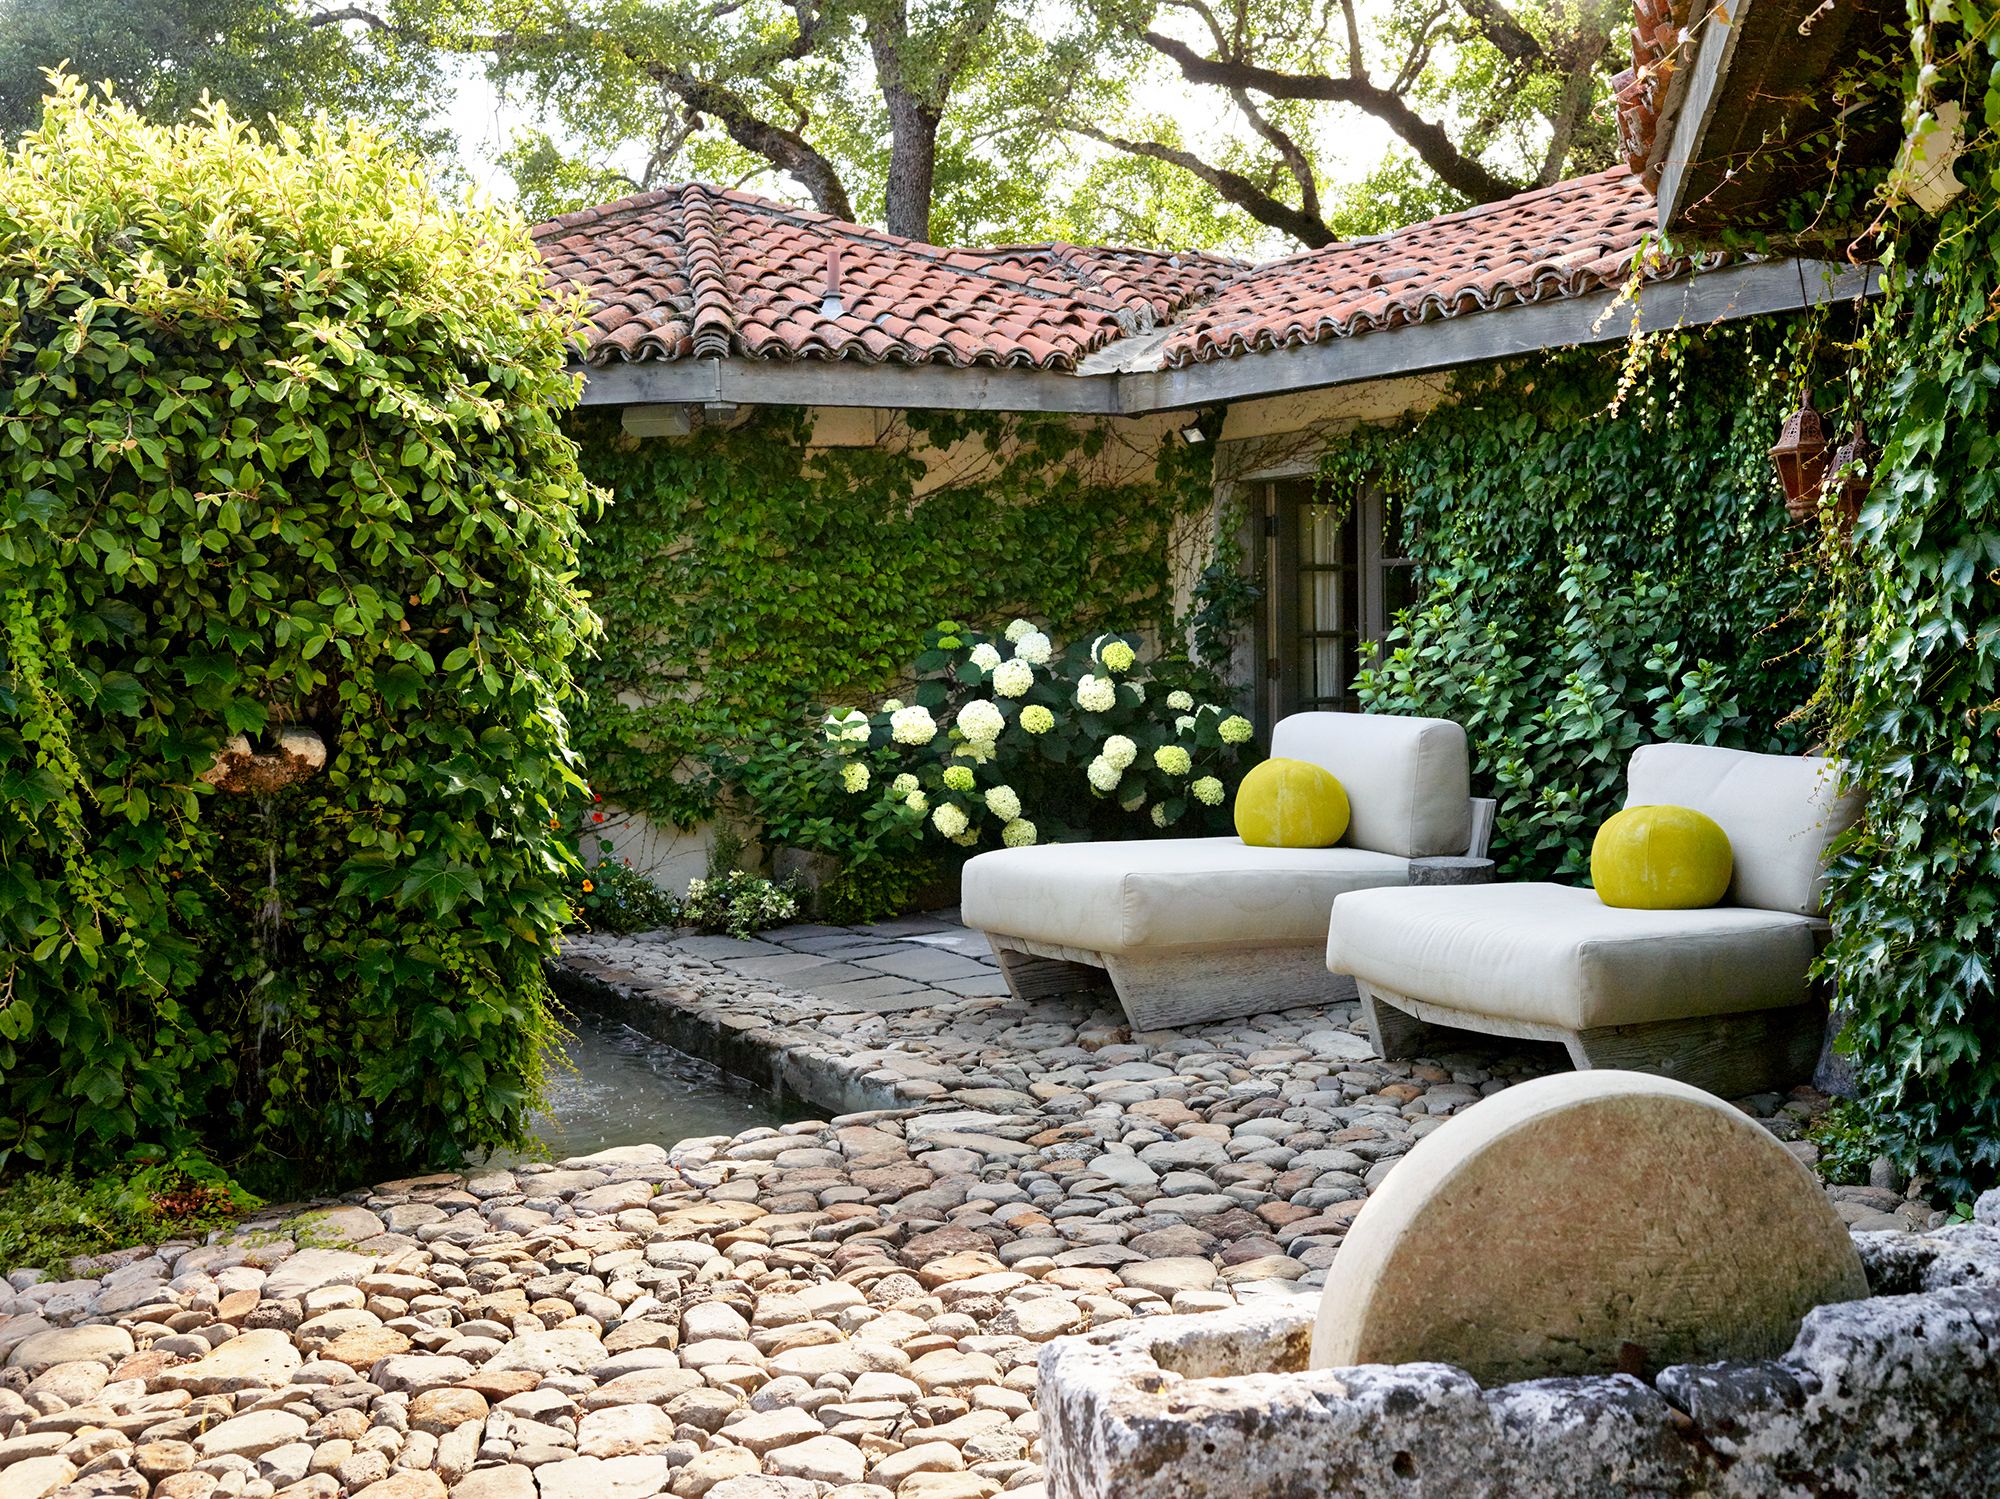 Patio Ideas to Add to Your Home